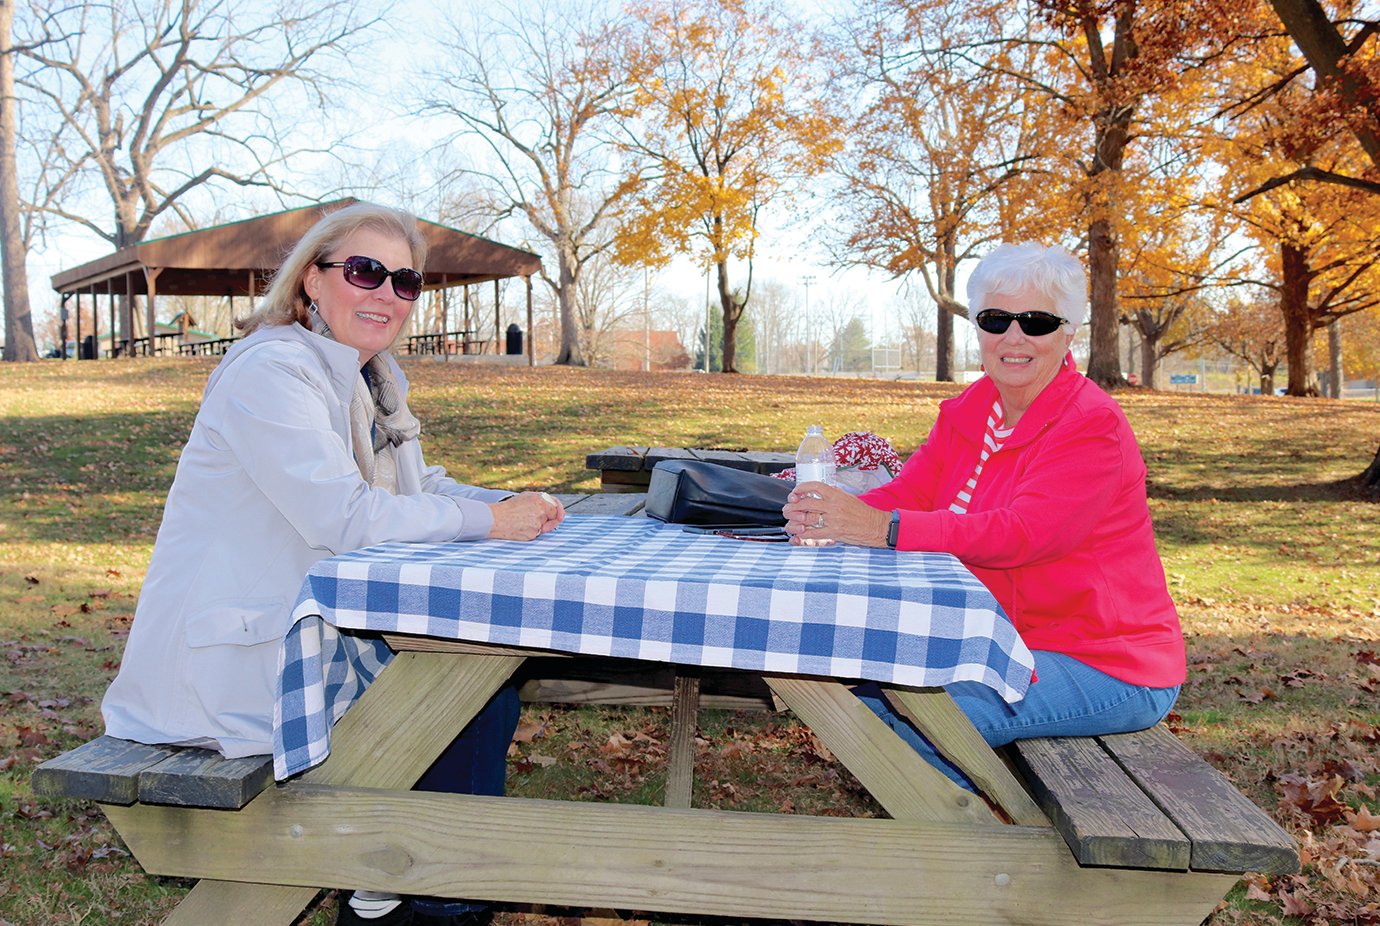 Kathy Evans, left, and Carole Huckstep meet for a reuinion after more than a year apart Friday for lunch at Milligan Park. The pair worked together in the nursing departments at various Crawfordsville district schools for many years.